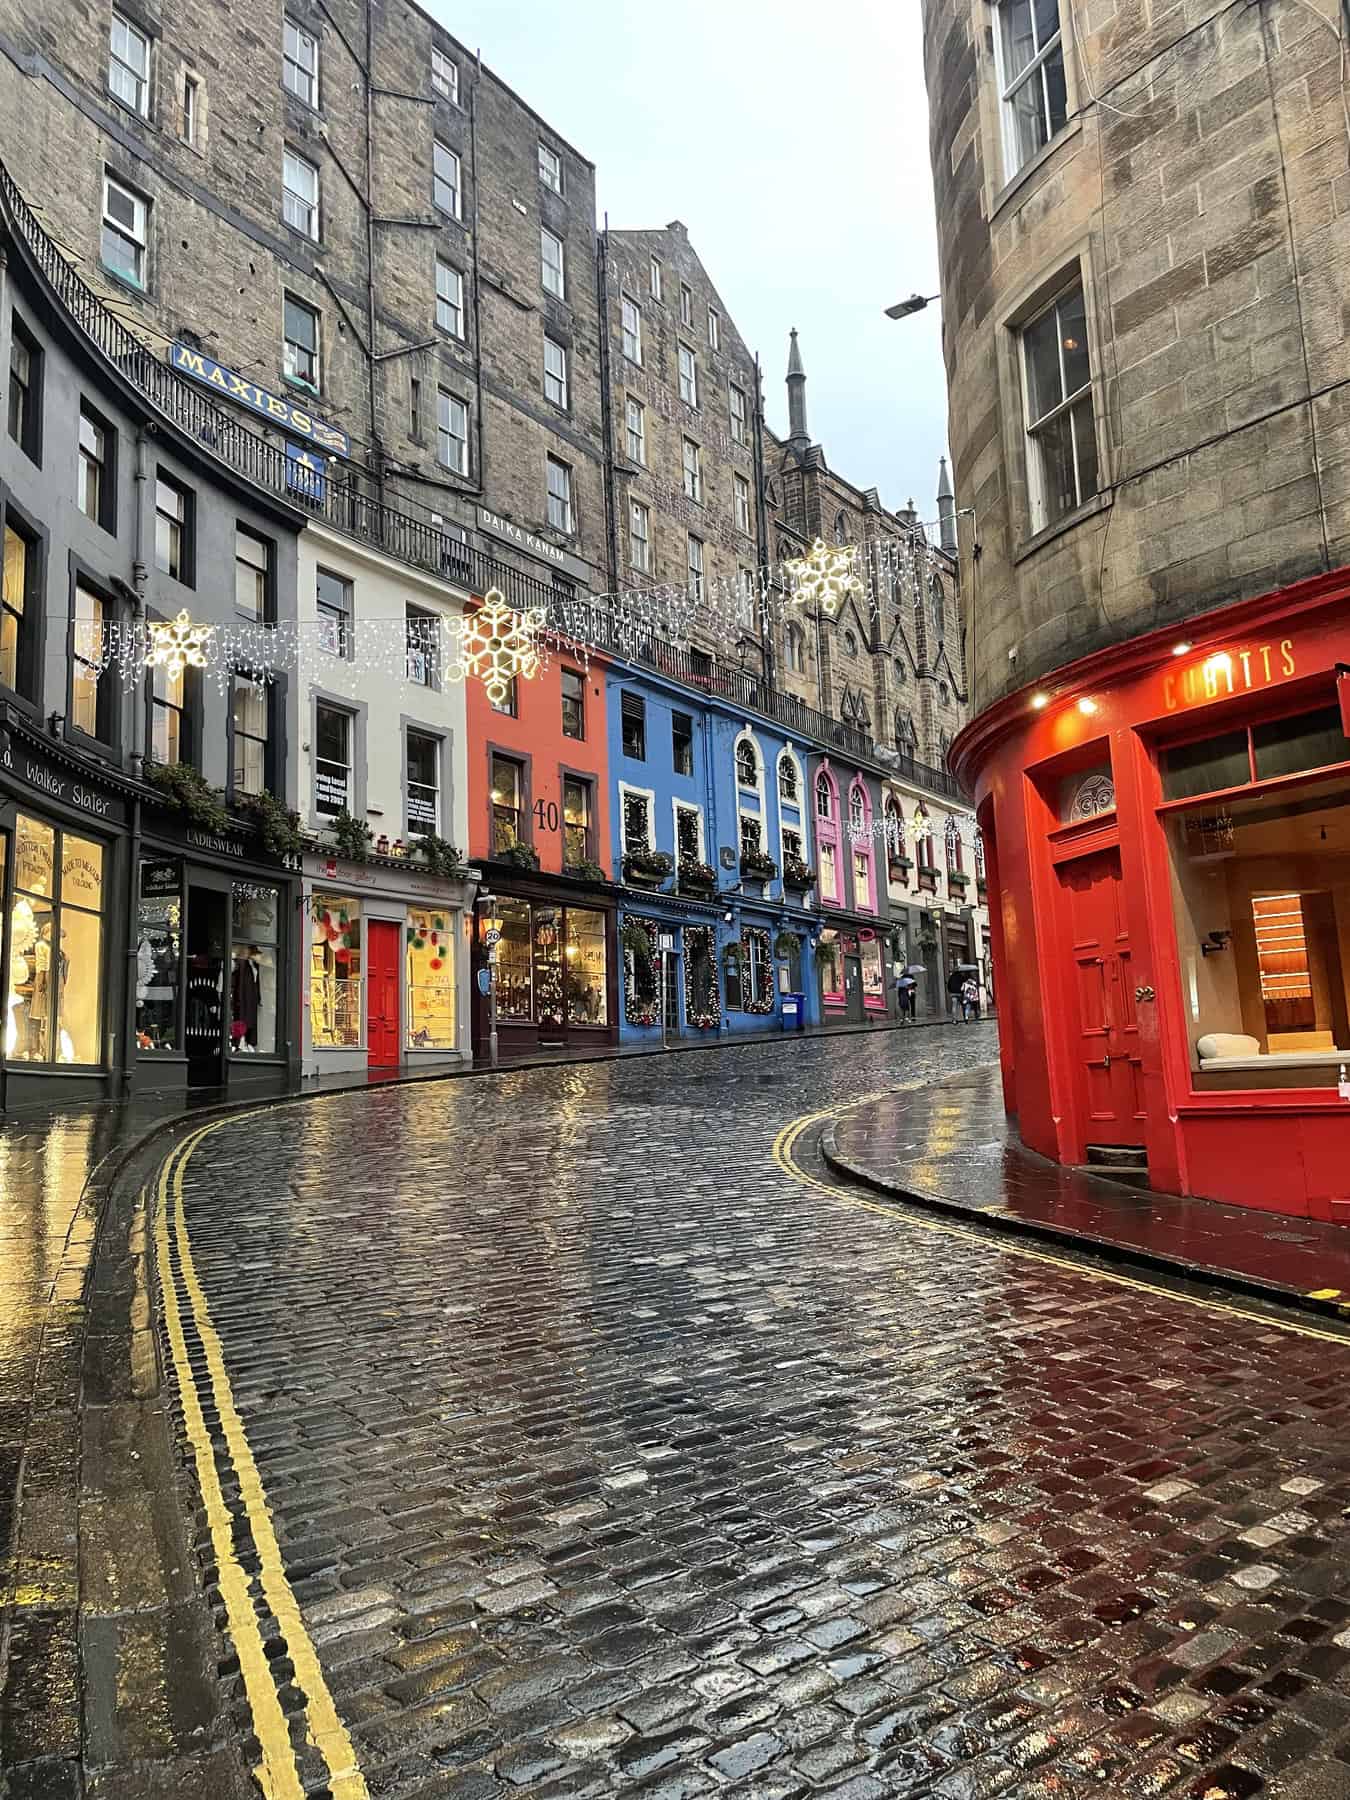 A vibrant street in Edinburgh, Scotland, with colorful shopfronts and holiday decorations reflecting off the wet cobblestones after a rain, creating a festive and cozy atmosphere in the historic city